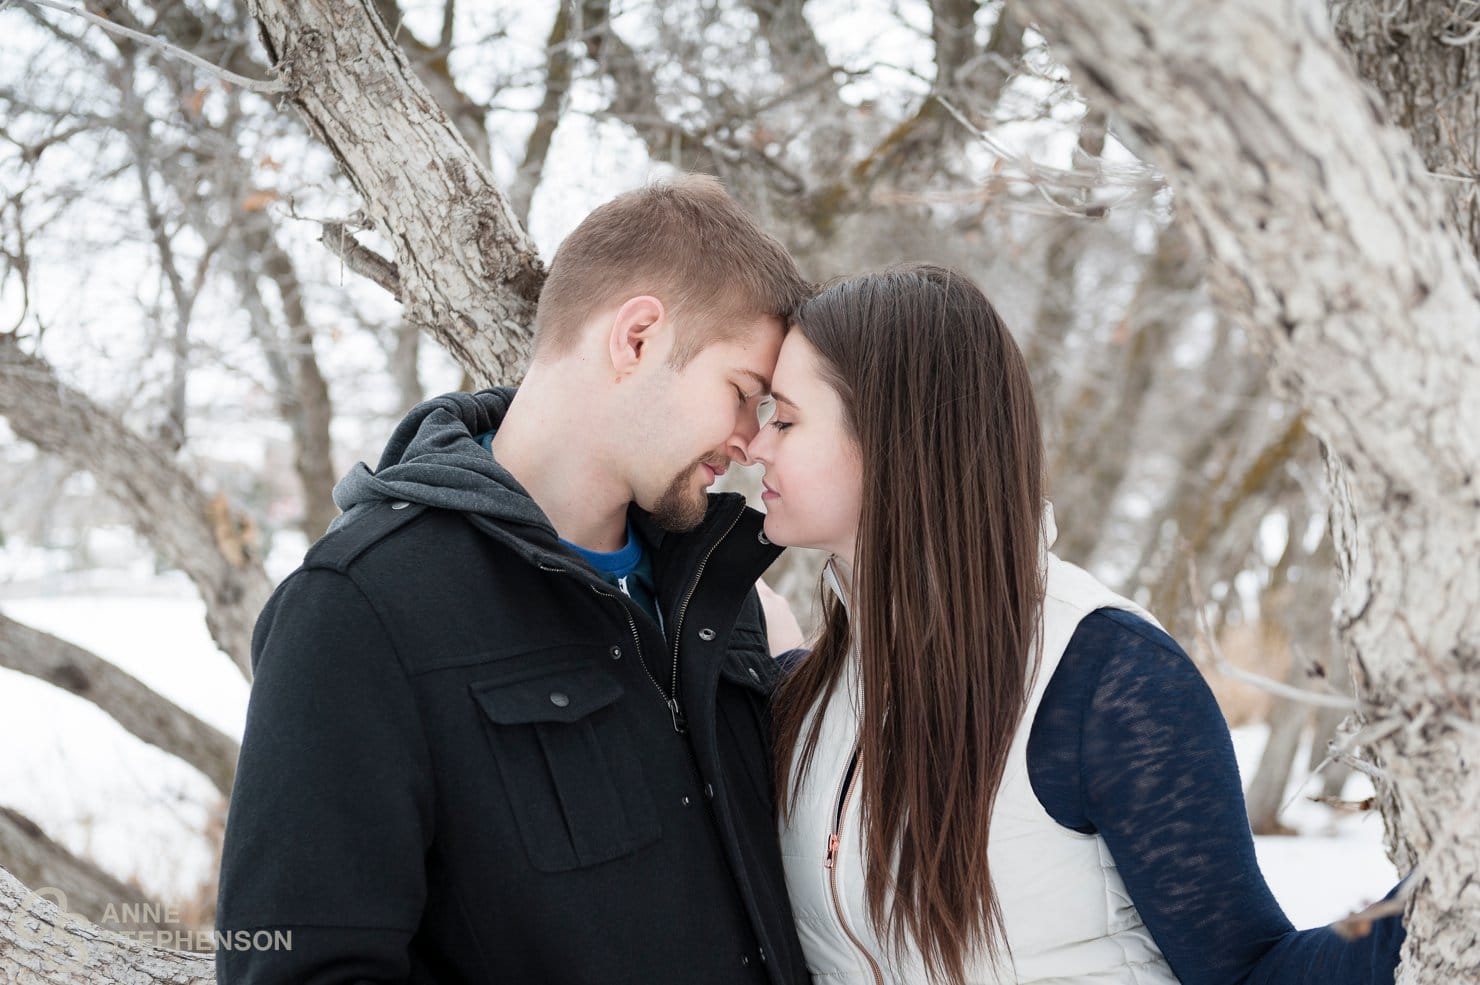 The moment before a man and woman kiss at their engagement session.